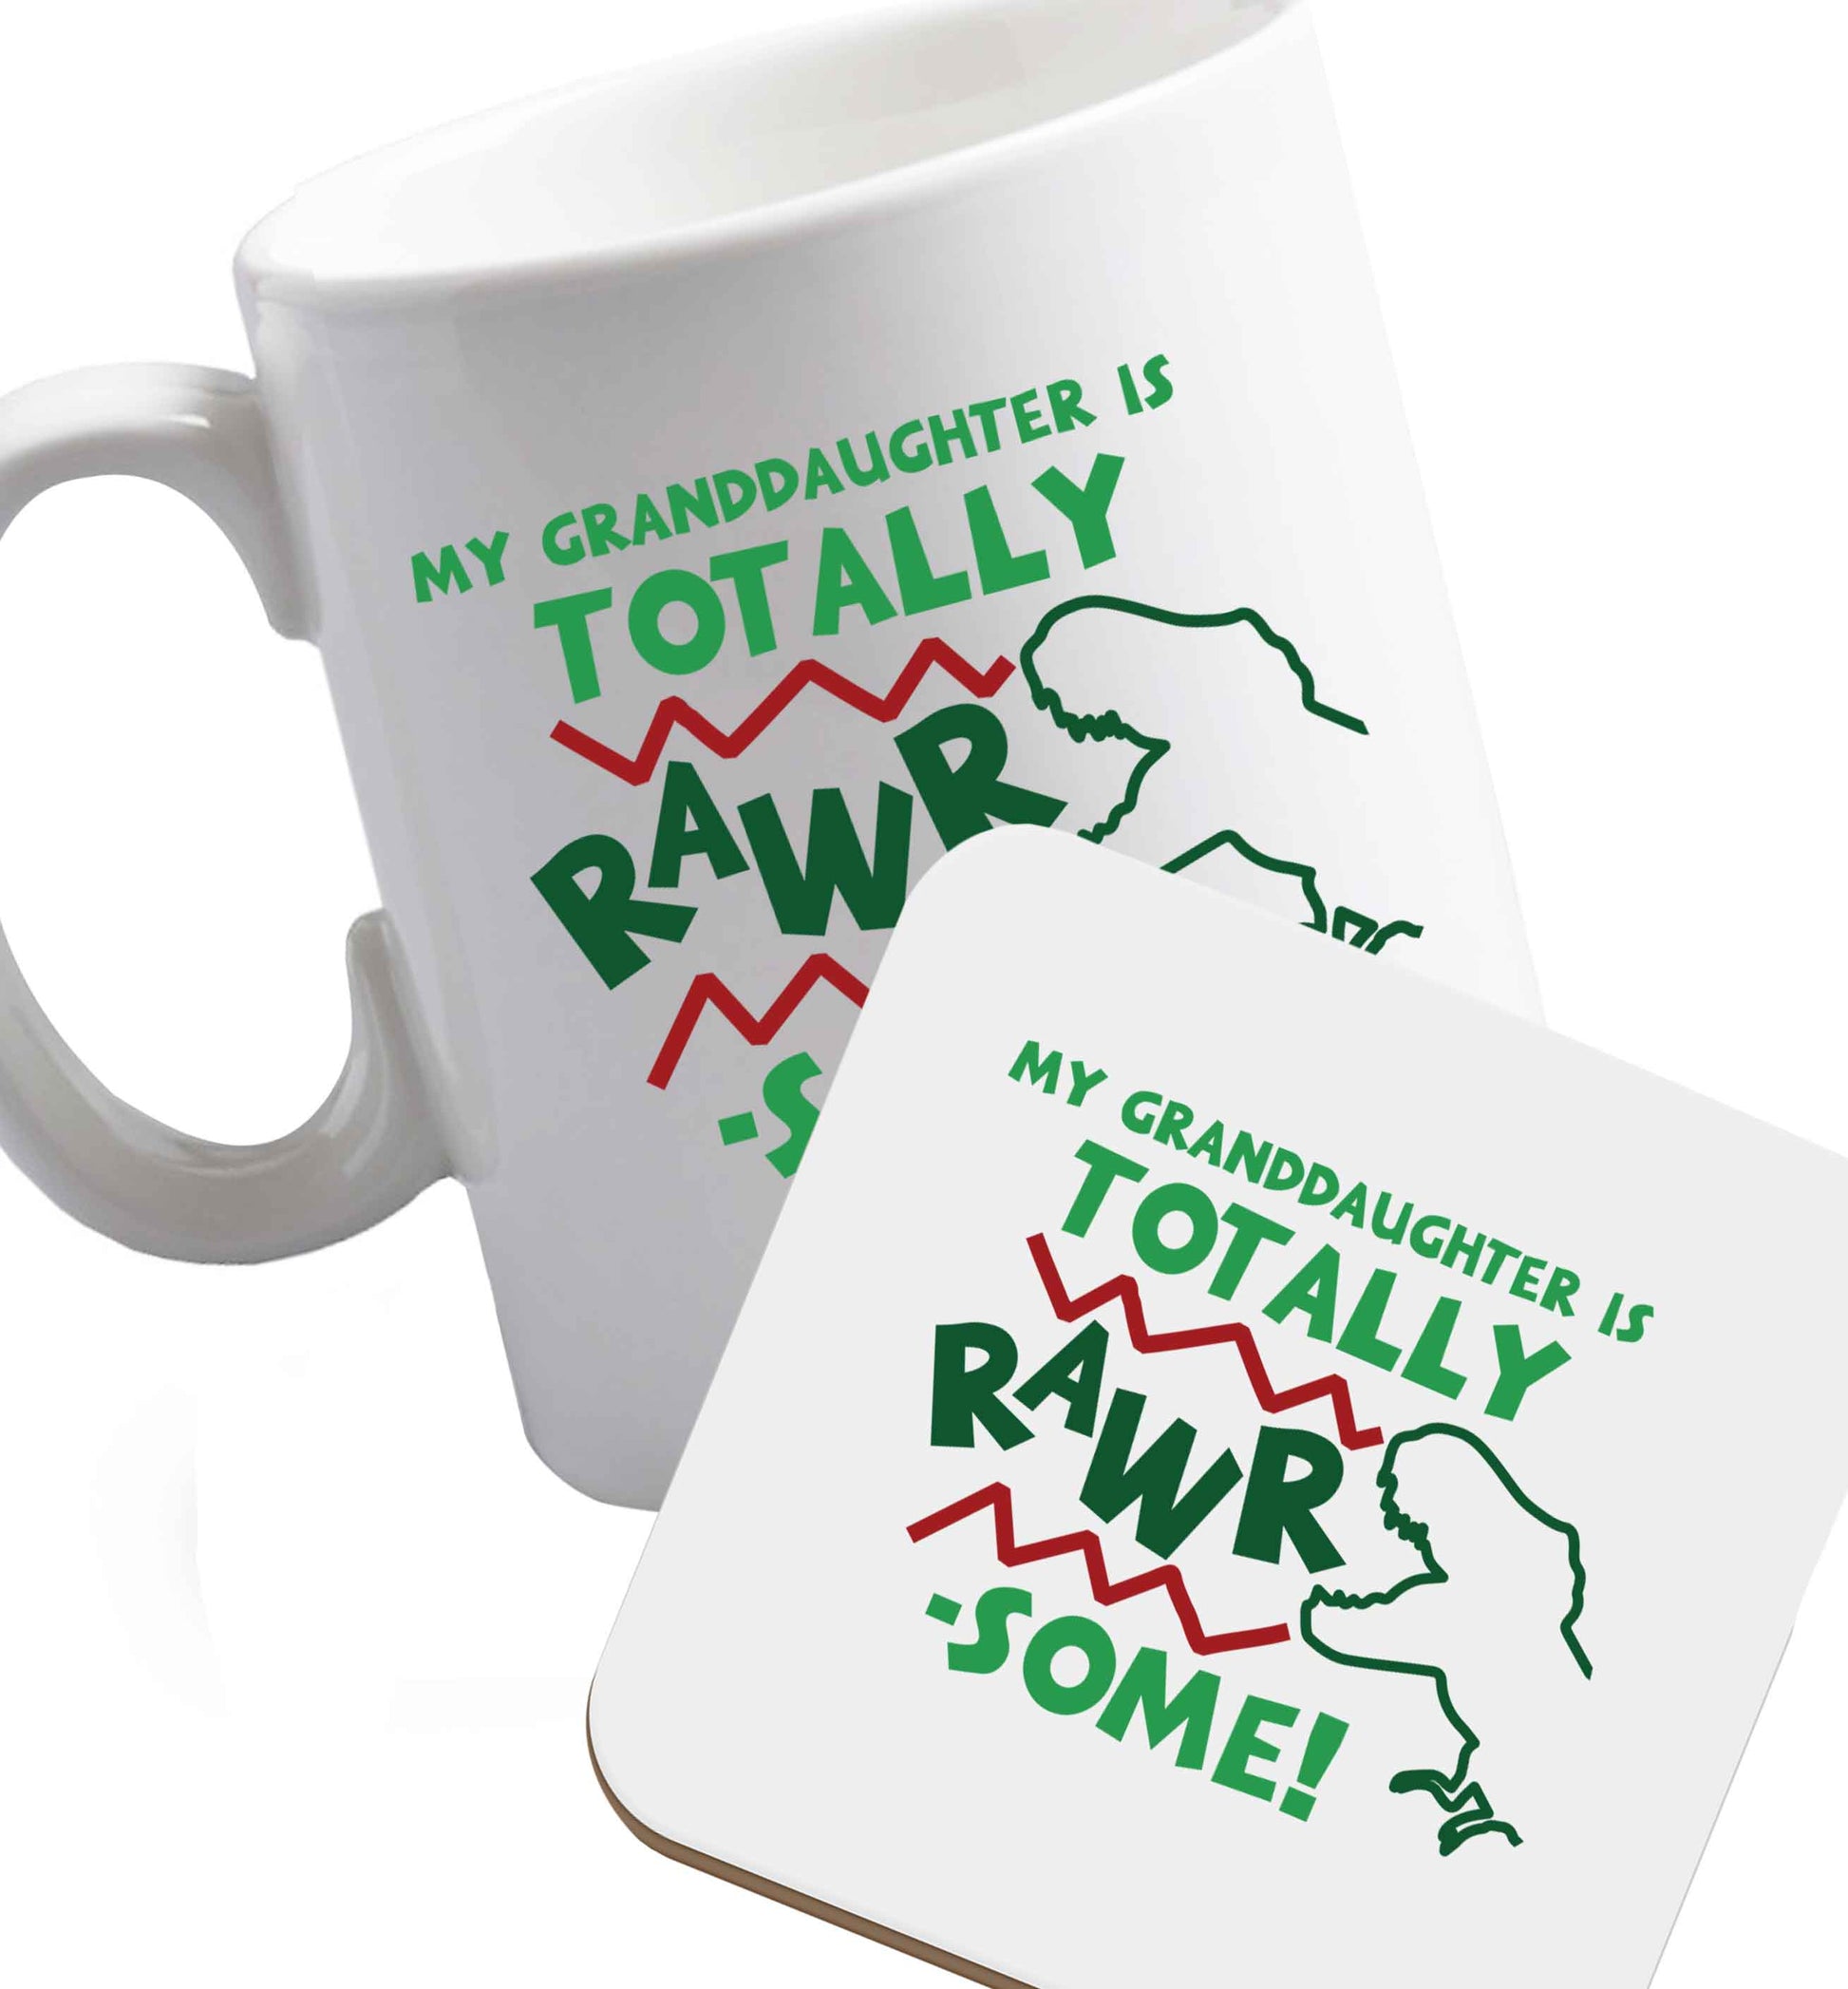 10 oz My granddaughter is totally rawrsome ceramic mug and coaster set right handed